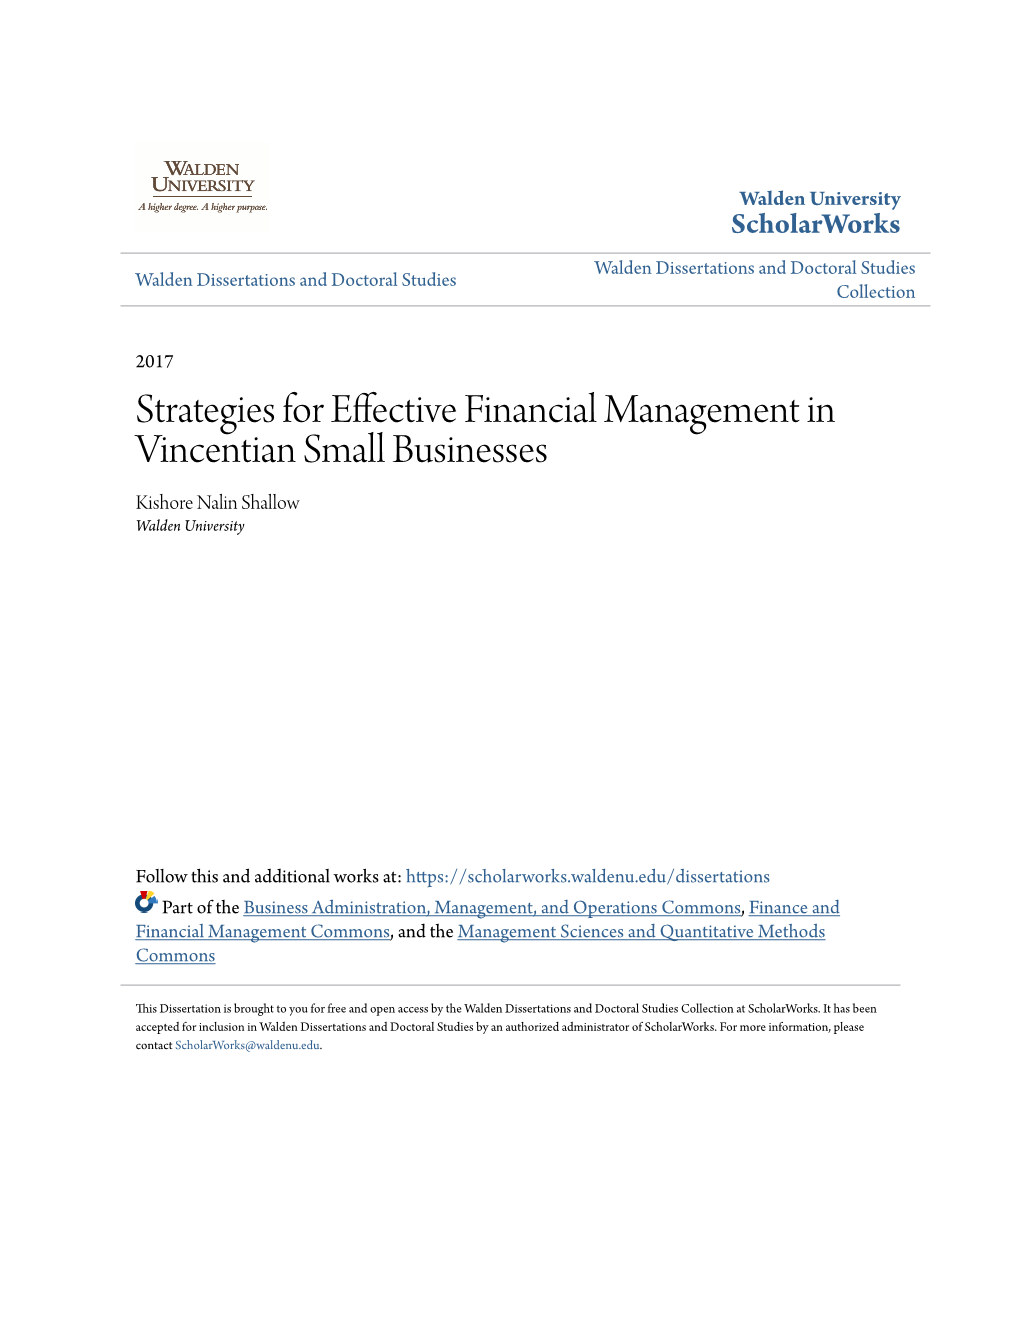 Strategies for Effective Financial Management in Vincentian Small Businesses Kishore Nalin Shallow Walden University